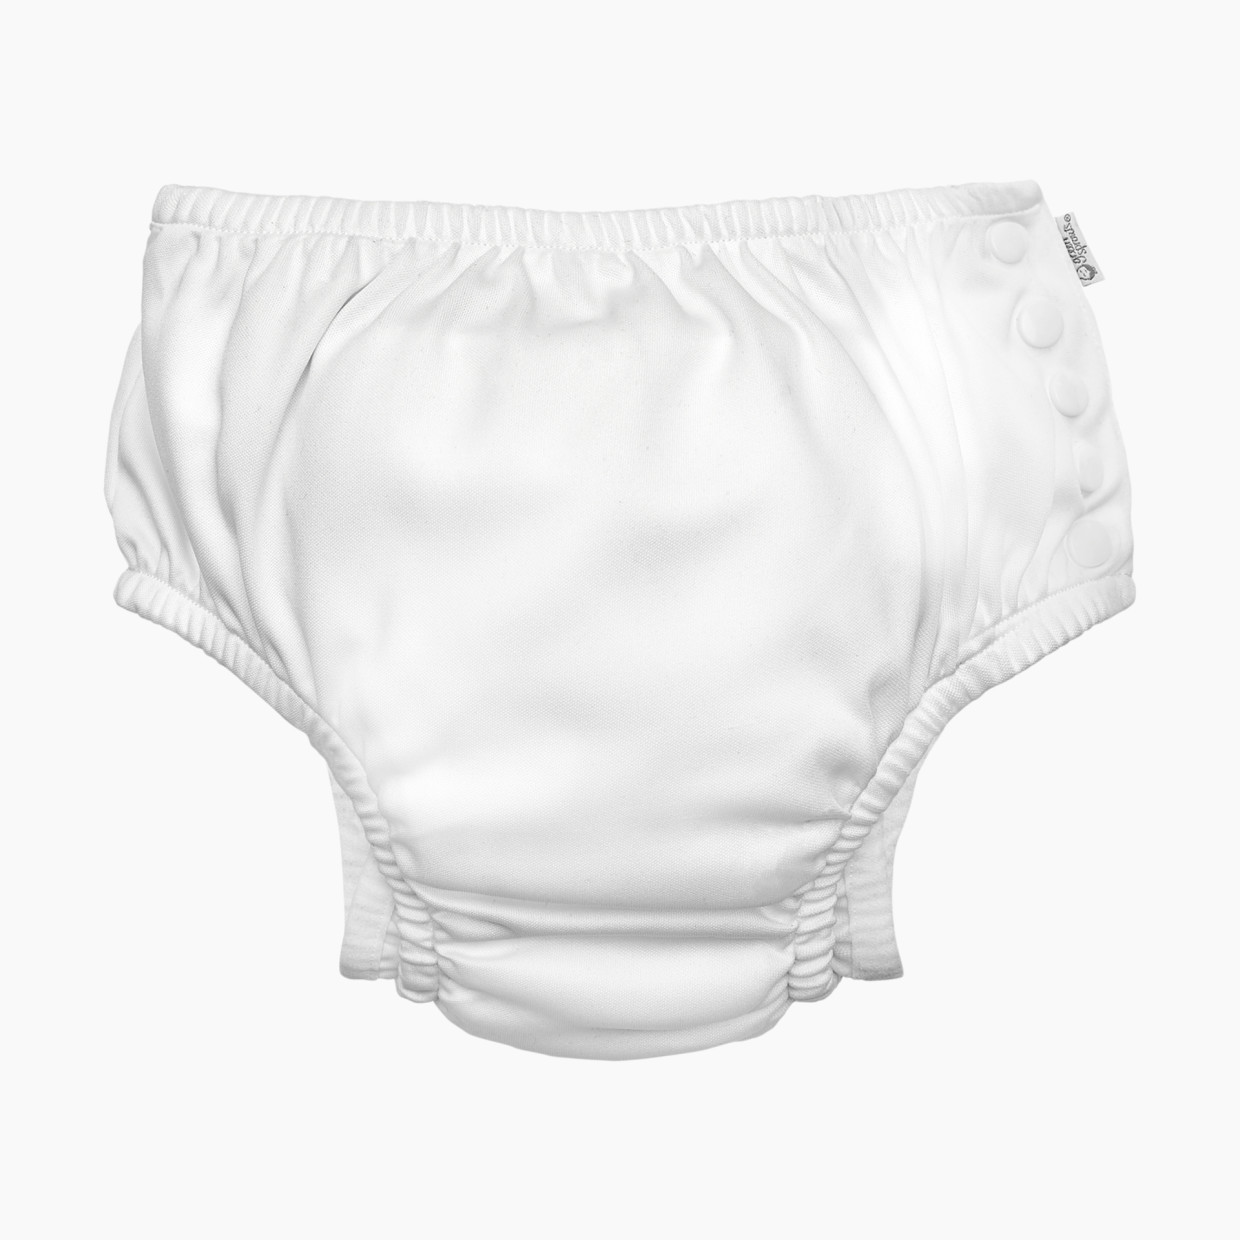 GREEN SPROUTS Eco Snap Swim Diaper - White, 6 Months.